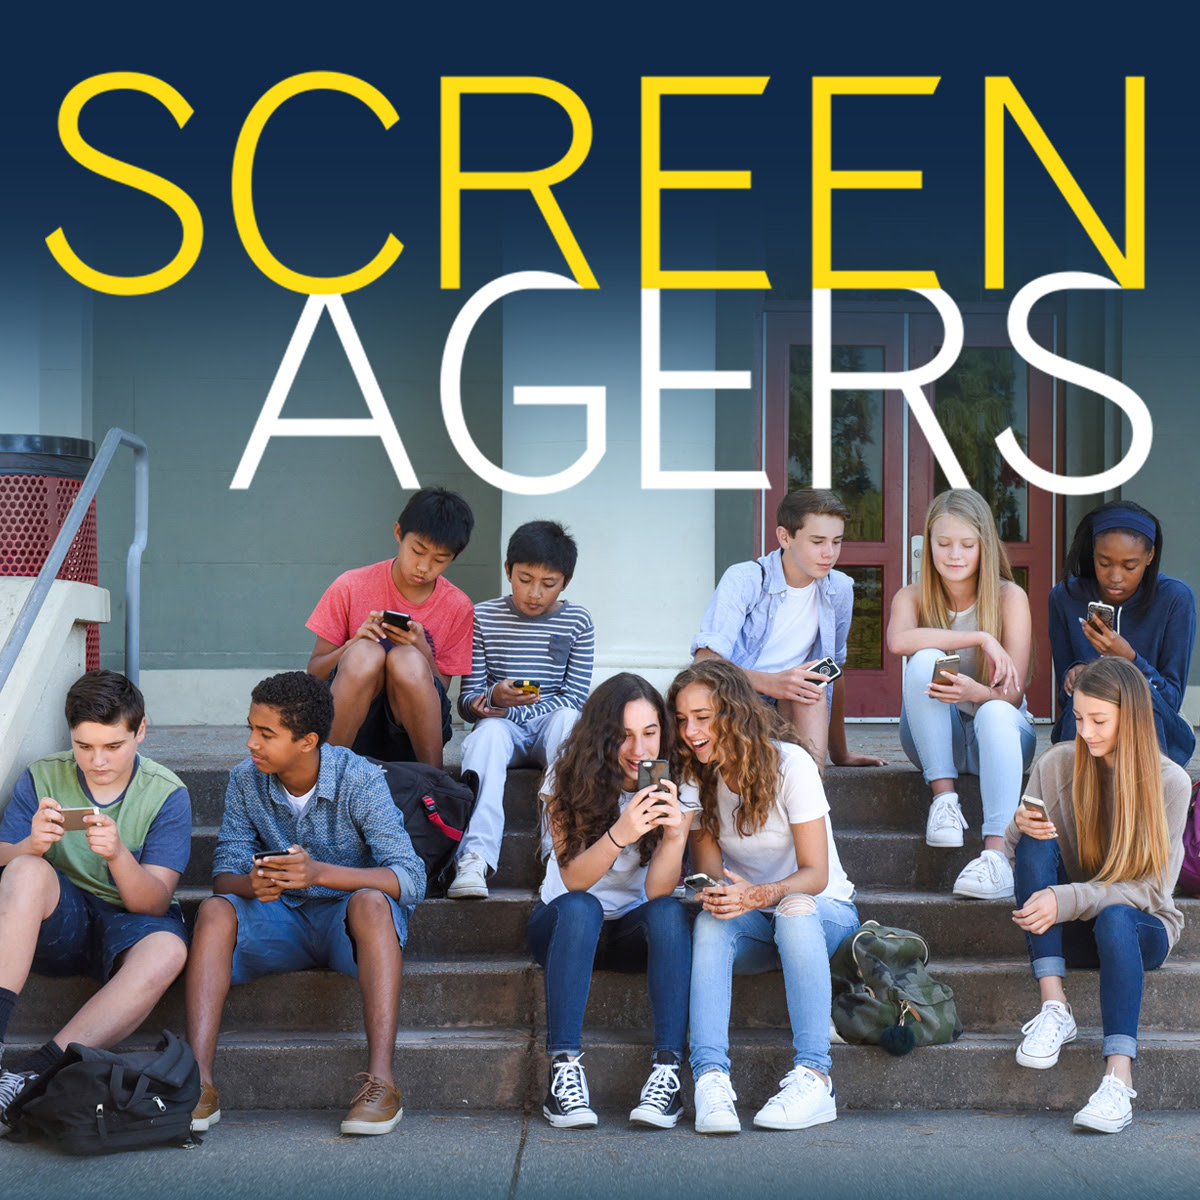 Screenagers Film Presented By Assumption Catholic Schools